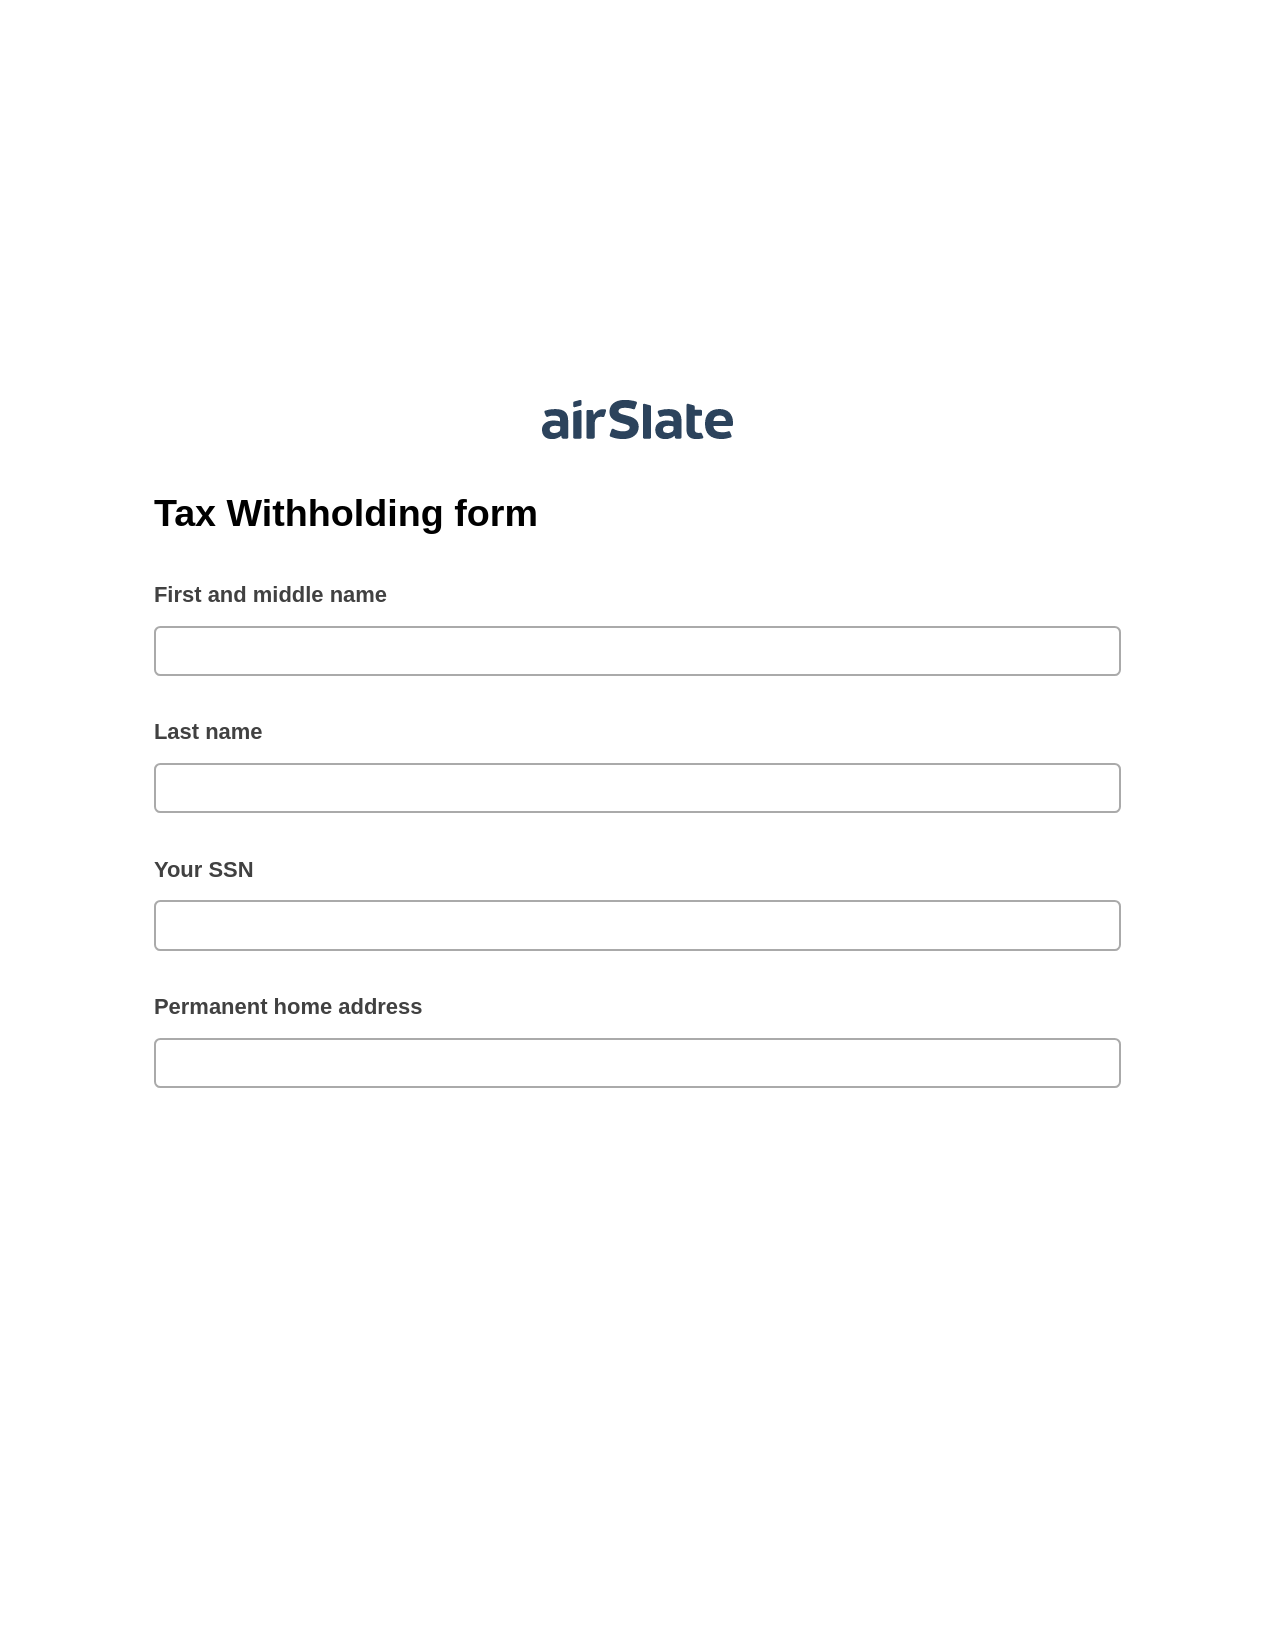 Multirole Tax Withholding form Pre-fill Slate from MS Dynamics 365 Records Bot, Set Signature Type Bot, Google Drive Bot